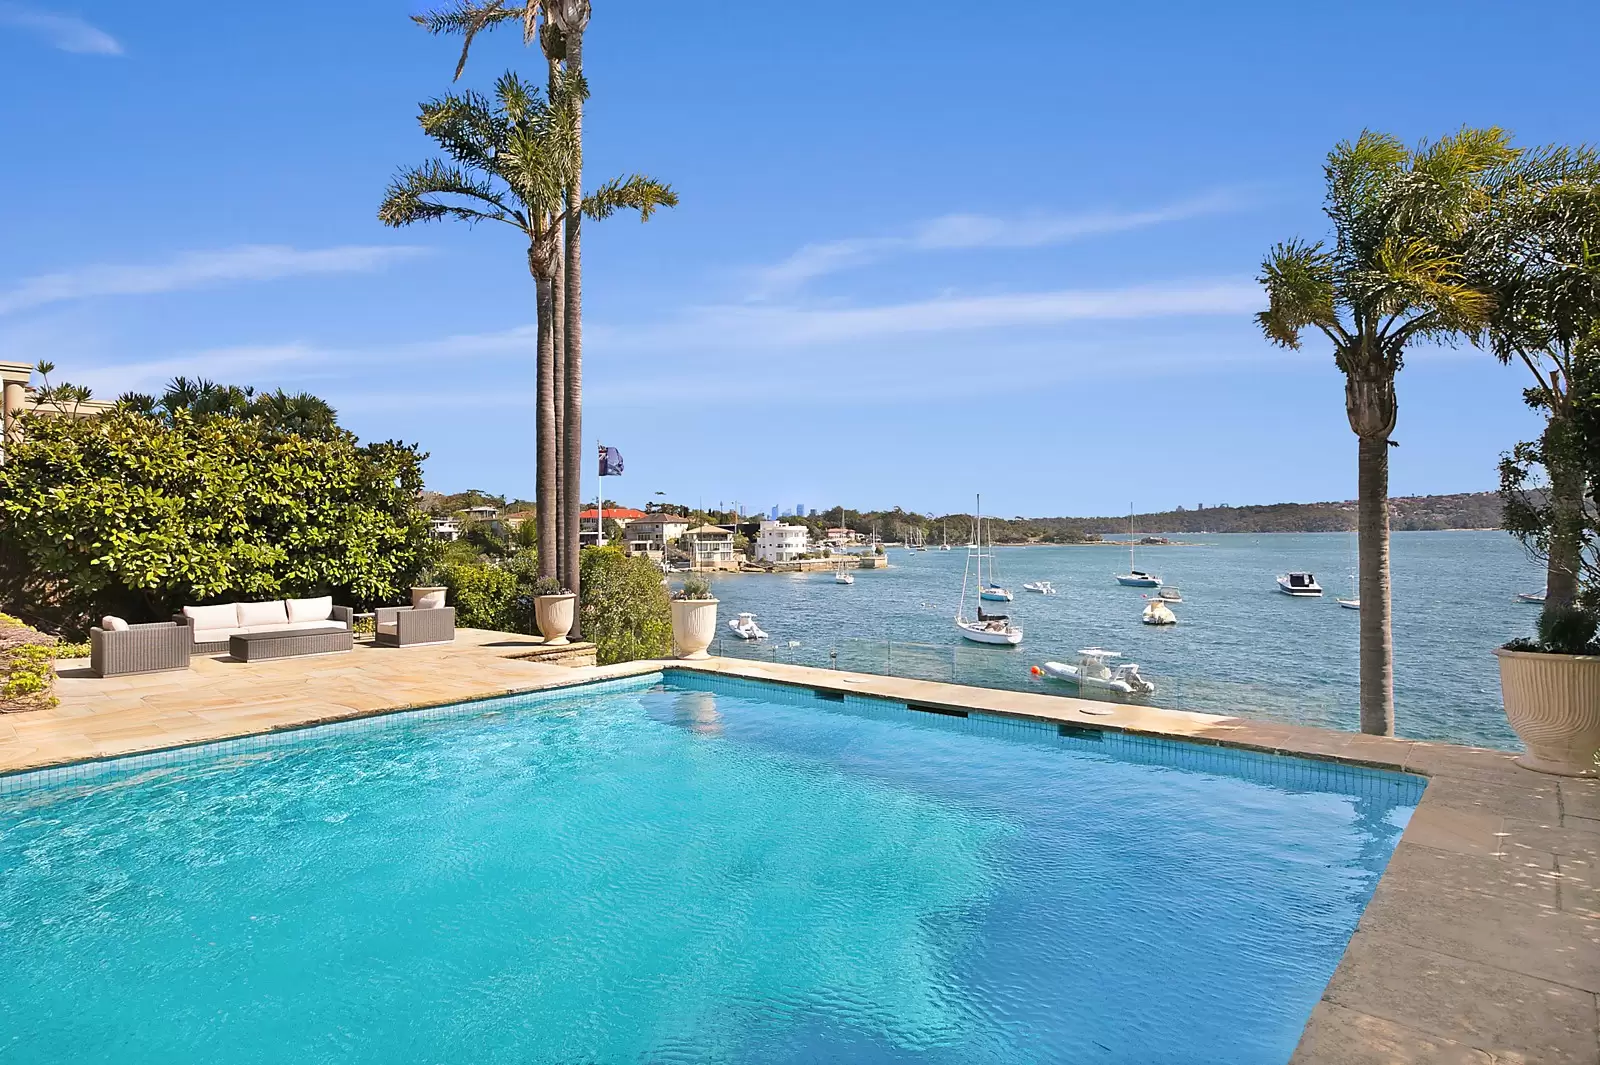 Photo #9: 34 The Crescent, Vaucluse - Sold by Sydney Sotheby's International Realty